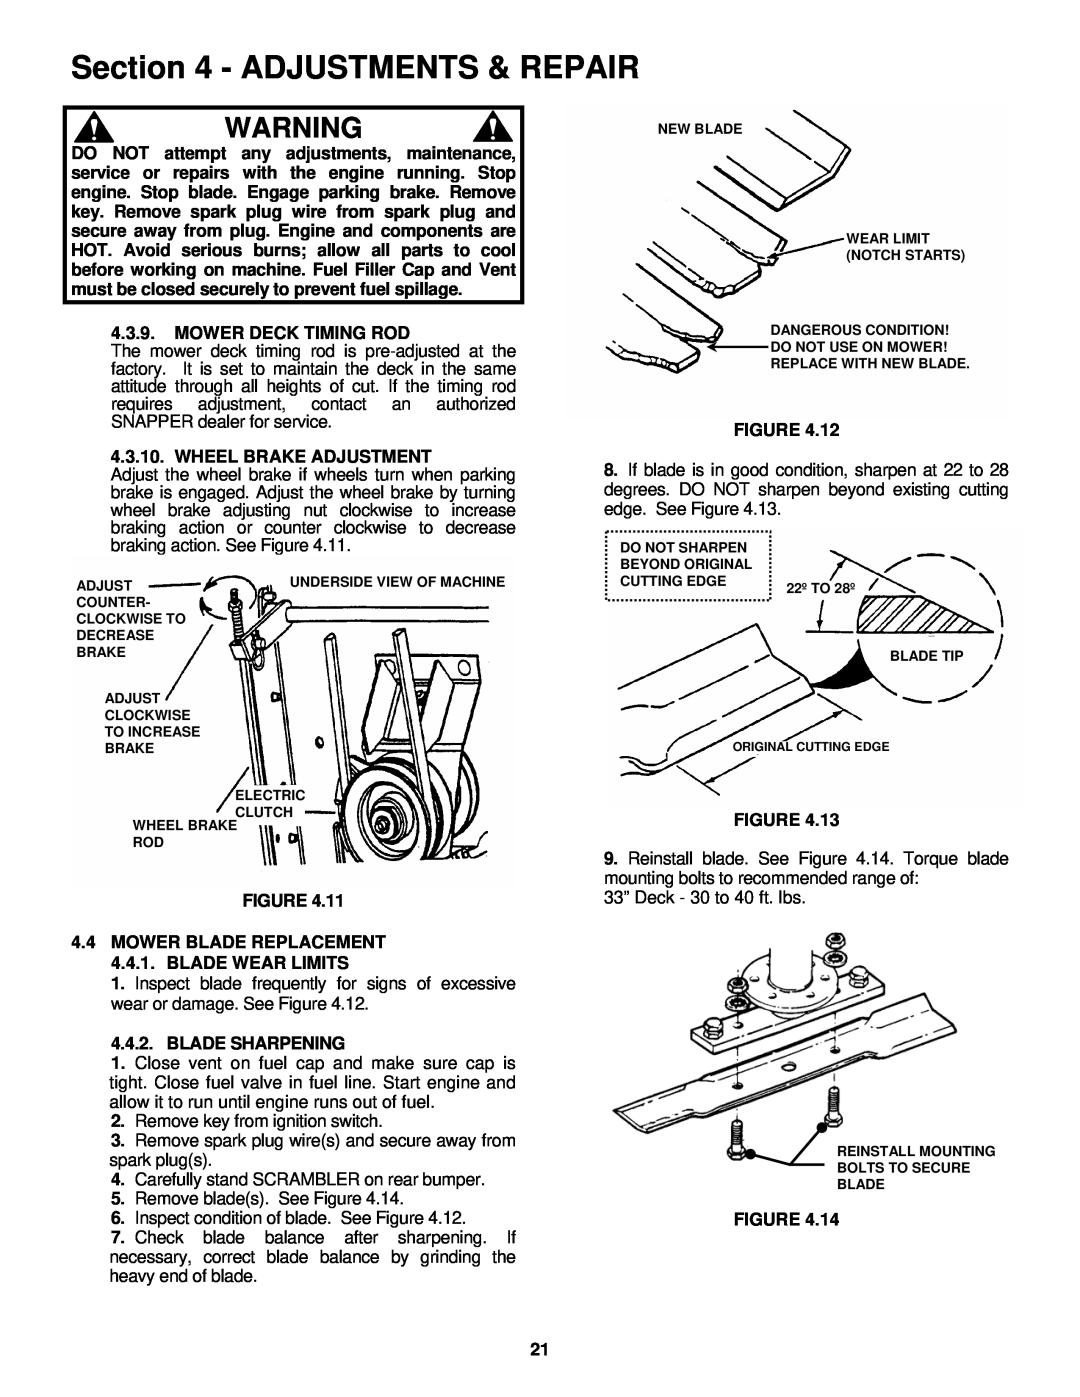 Snapper EYZ16335BVE important safety instructions Adjustments & Repair, Mower Deck Timing Rod 